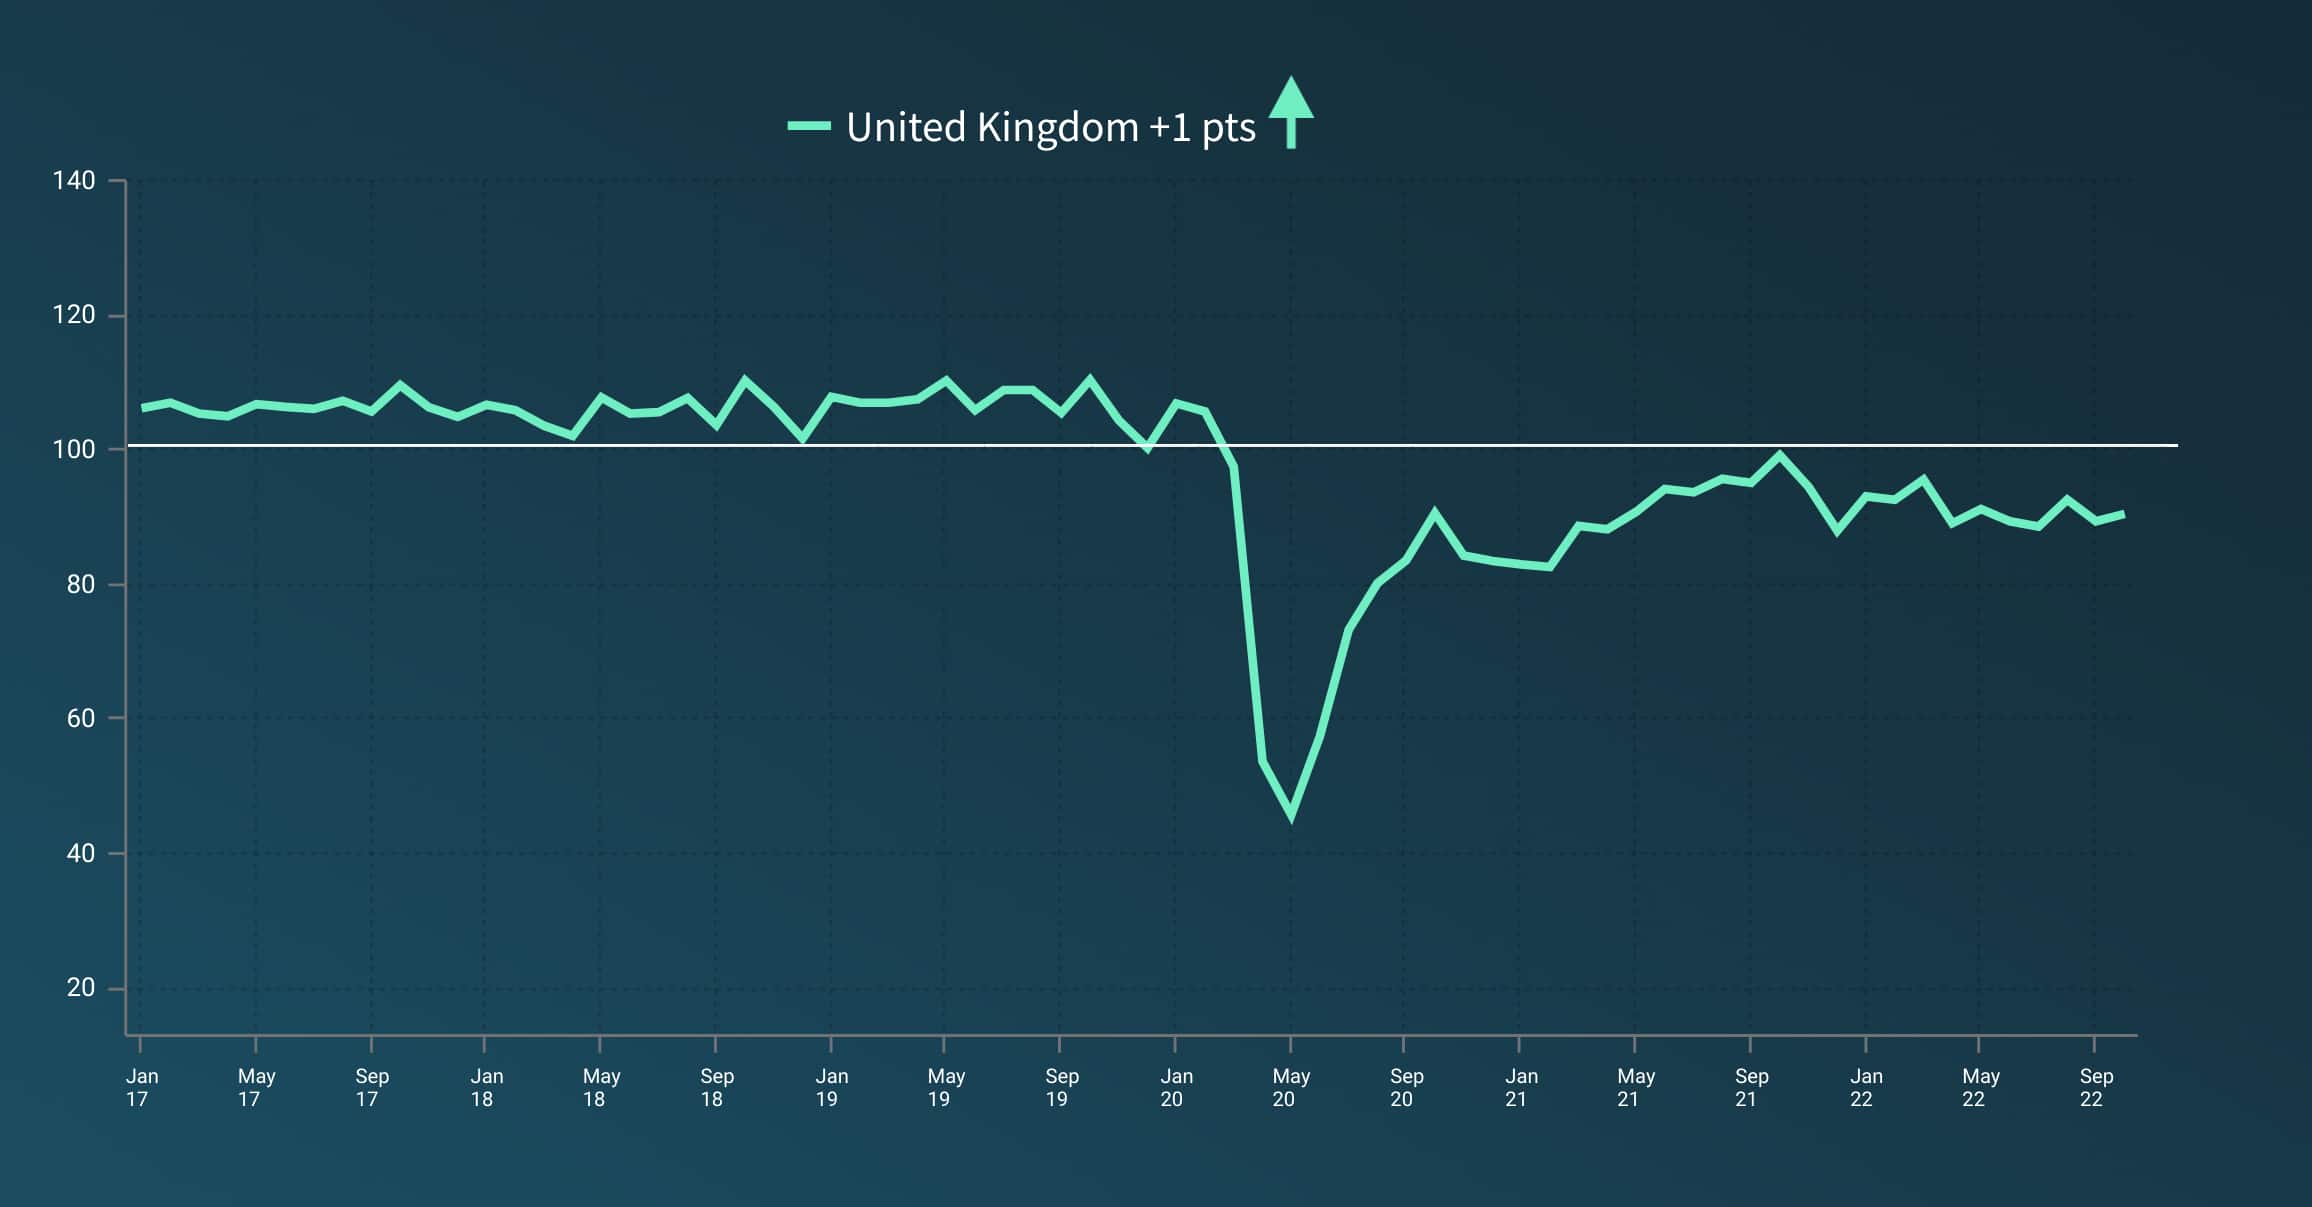 A line graph showing the ups and downs in the United Kingdom Small Business Index since January 2017.